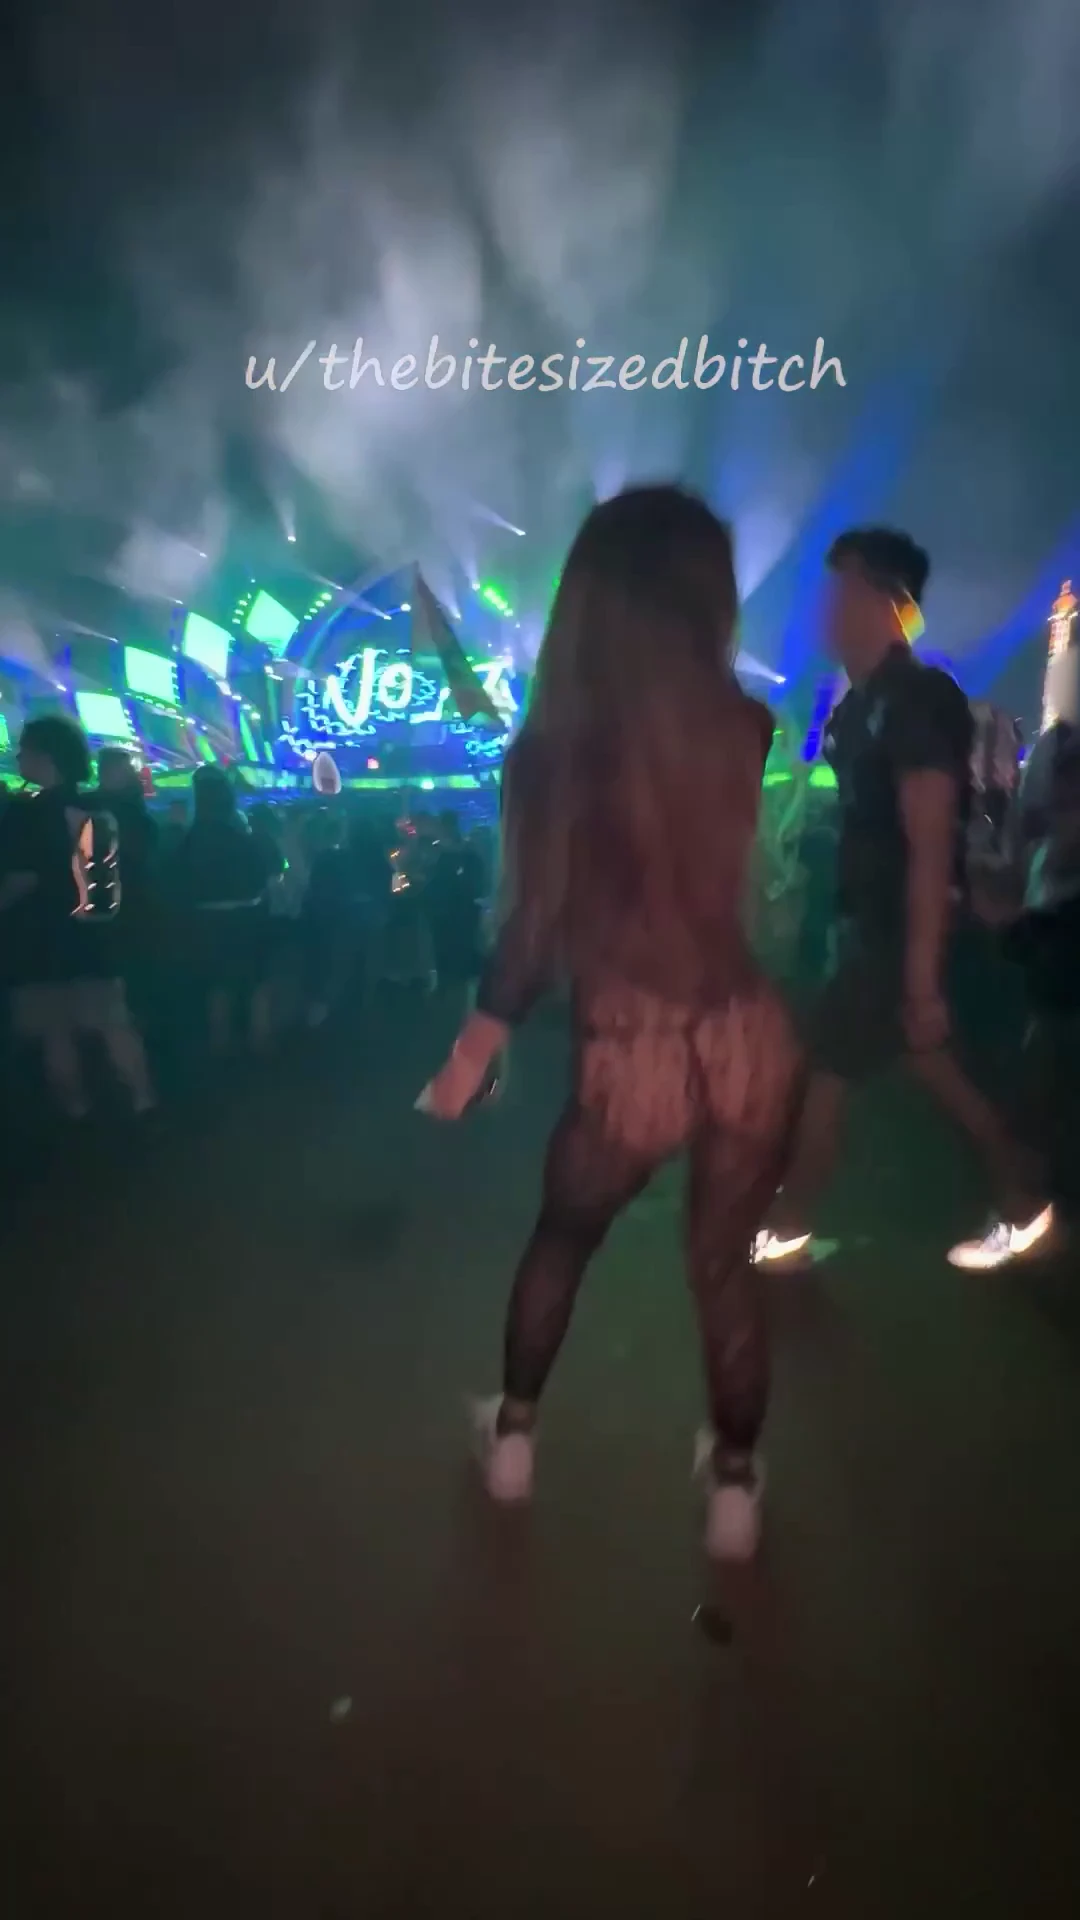 Lil asian goes wild at rave 😅